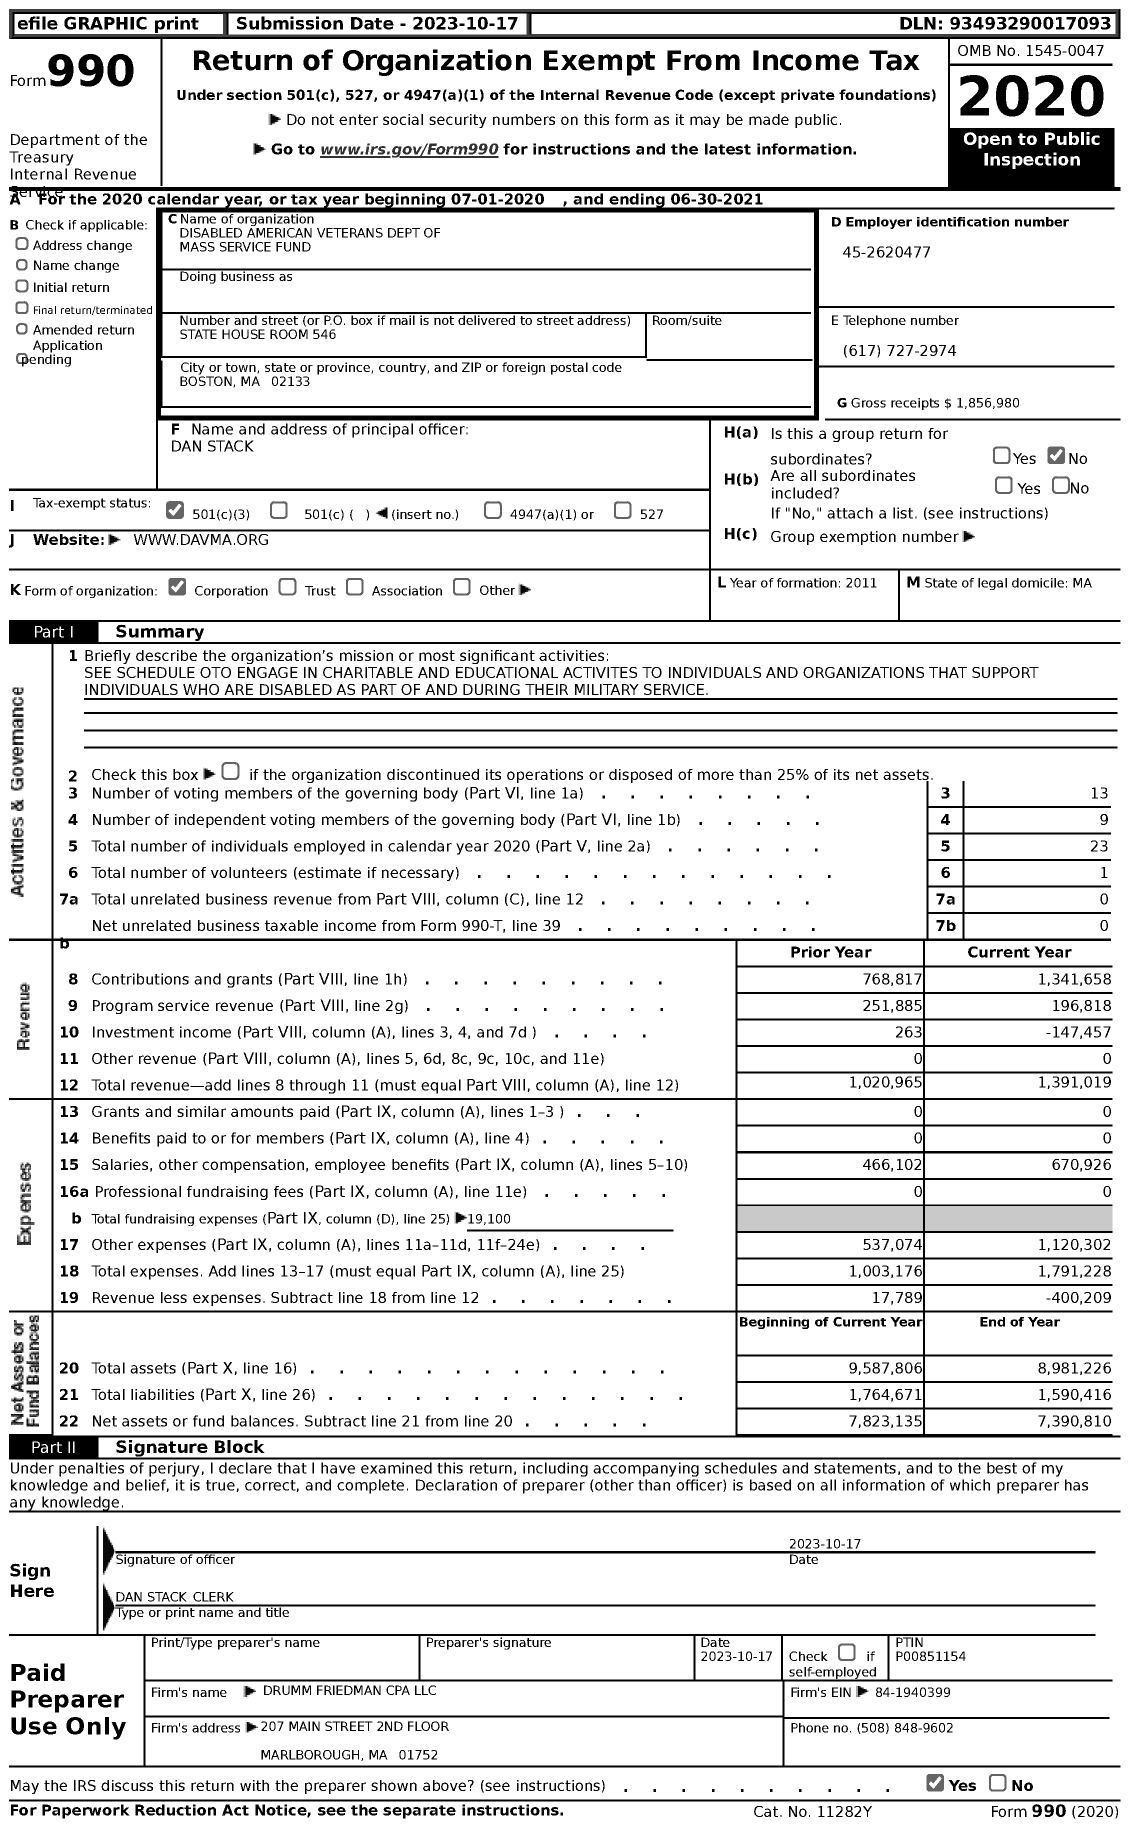 Image of first page of 2020 Form 990 for Disabled American Veterans Dept of Mass Service Fund